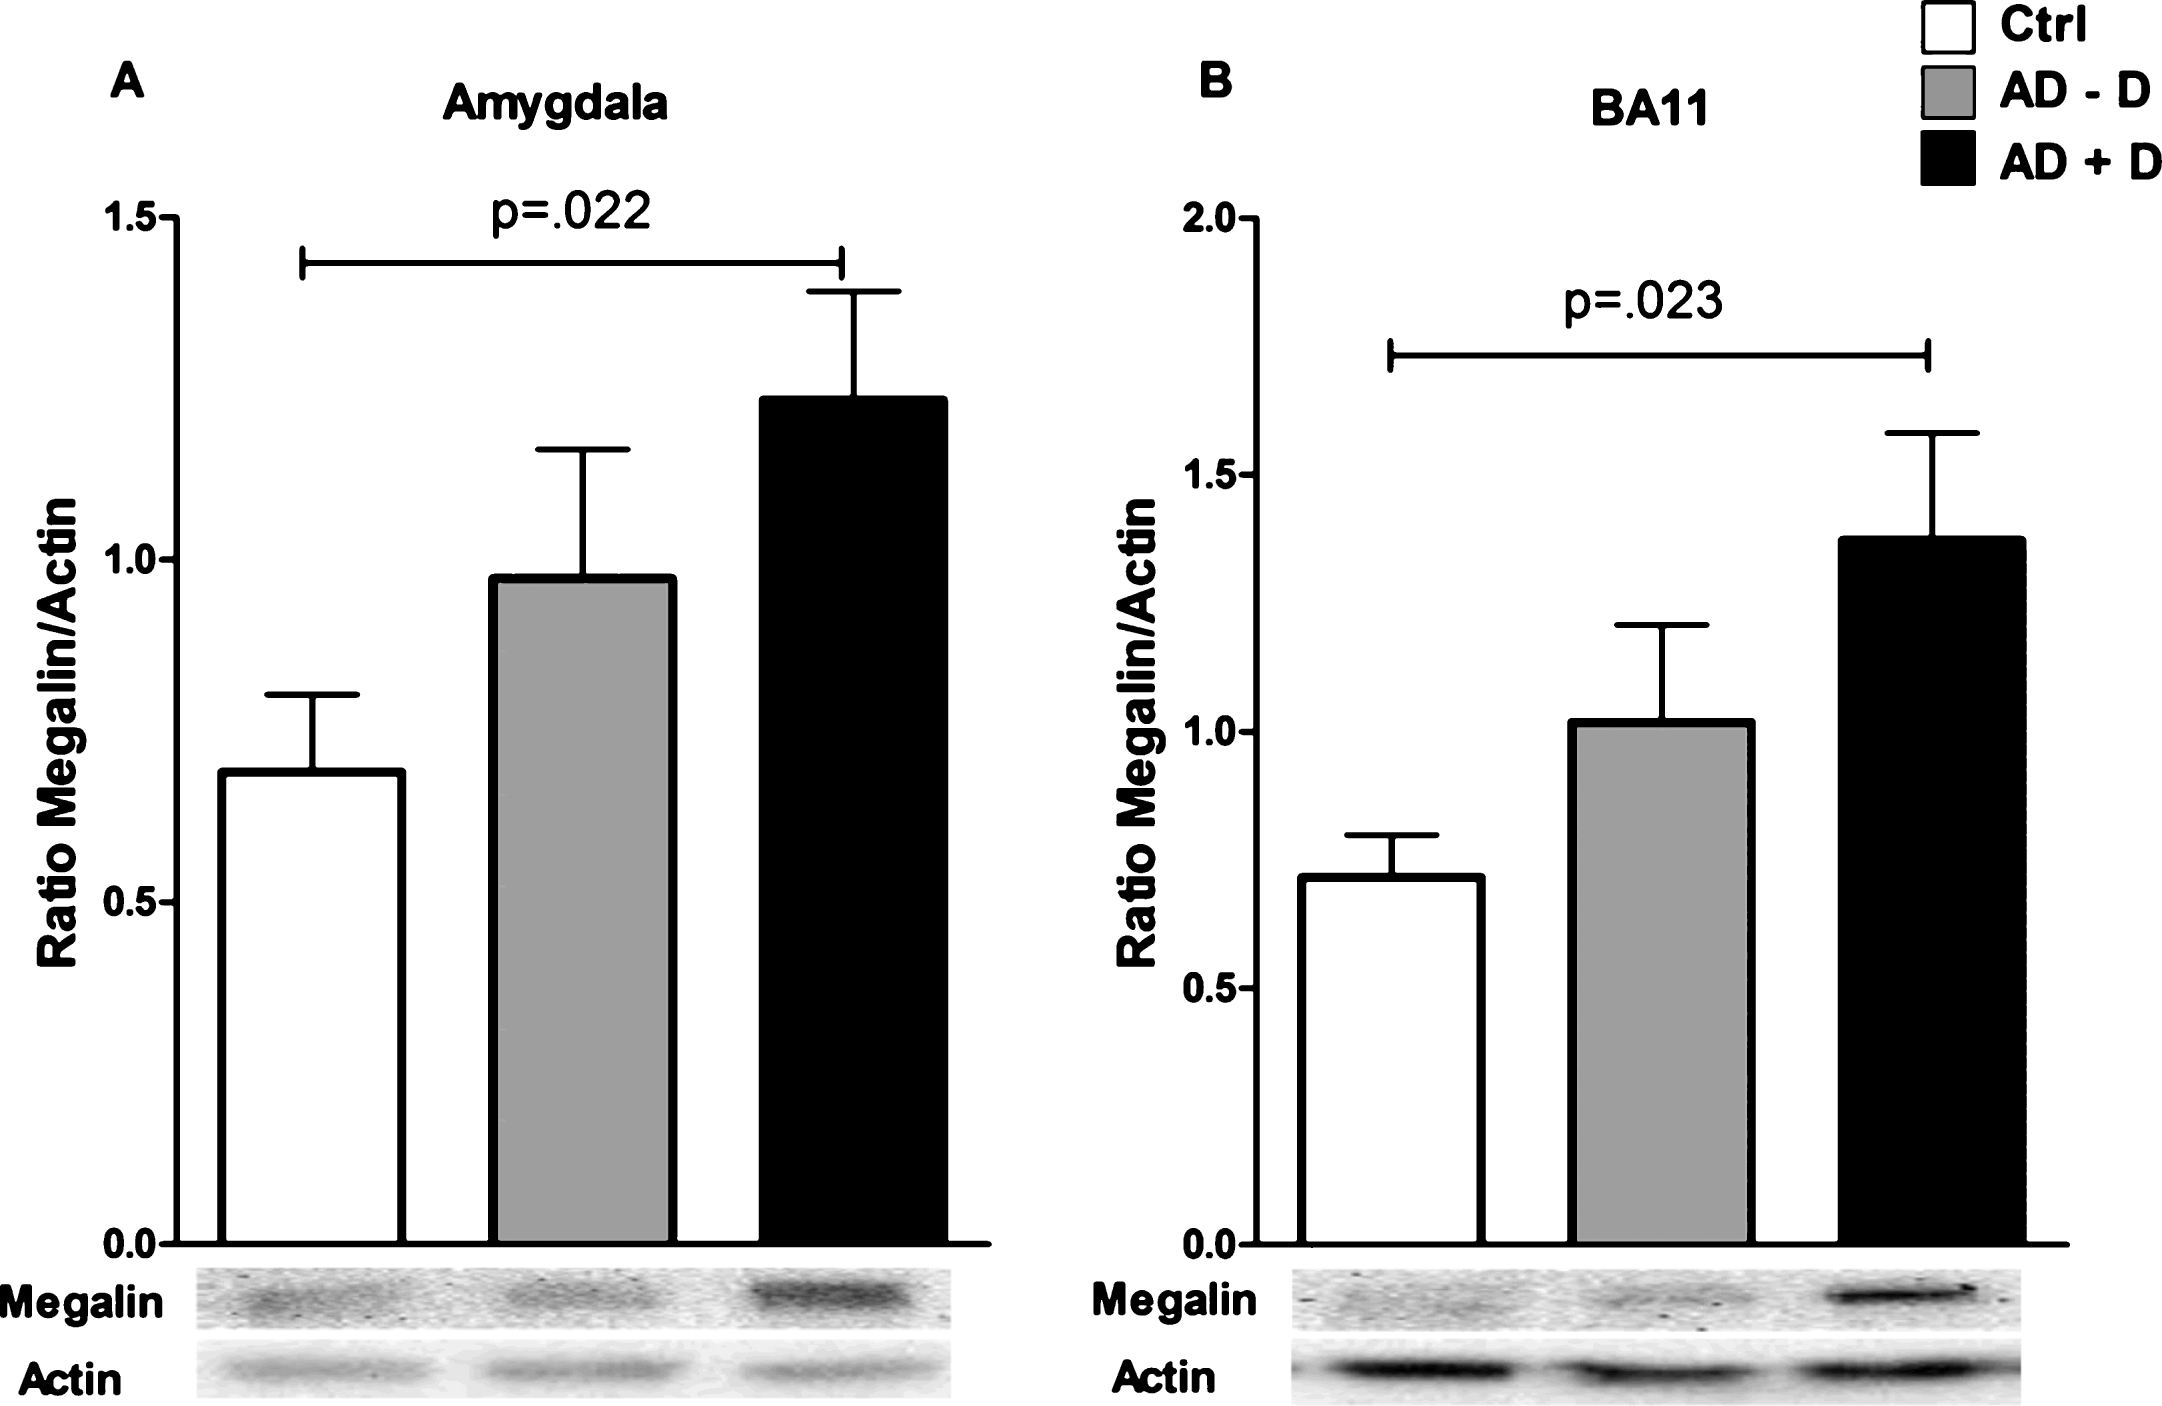 Megalin levels in (A) BA11 and the (B) amygdala of control, AD–D, and AD+D patients. Bars indicate the mean megalin/actin ratio, ±SEM. AD–D, Alzheimer’s disease without co-existing depression; AD+D, Alzheimer’s disease with co-existing depression; BA, Brodmann area.